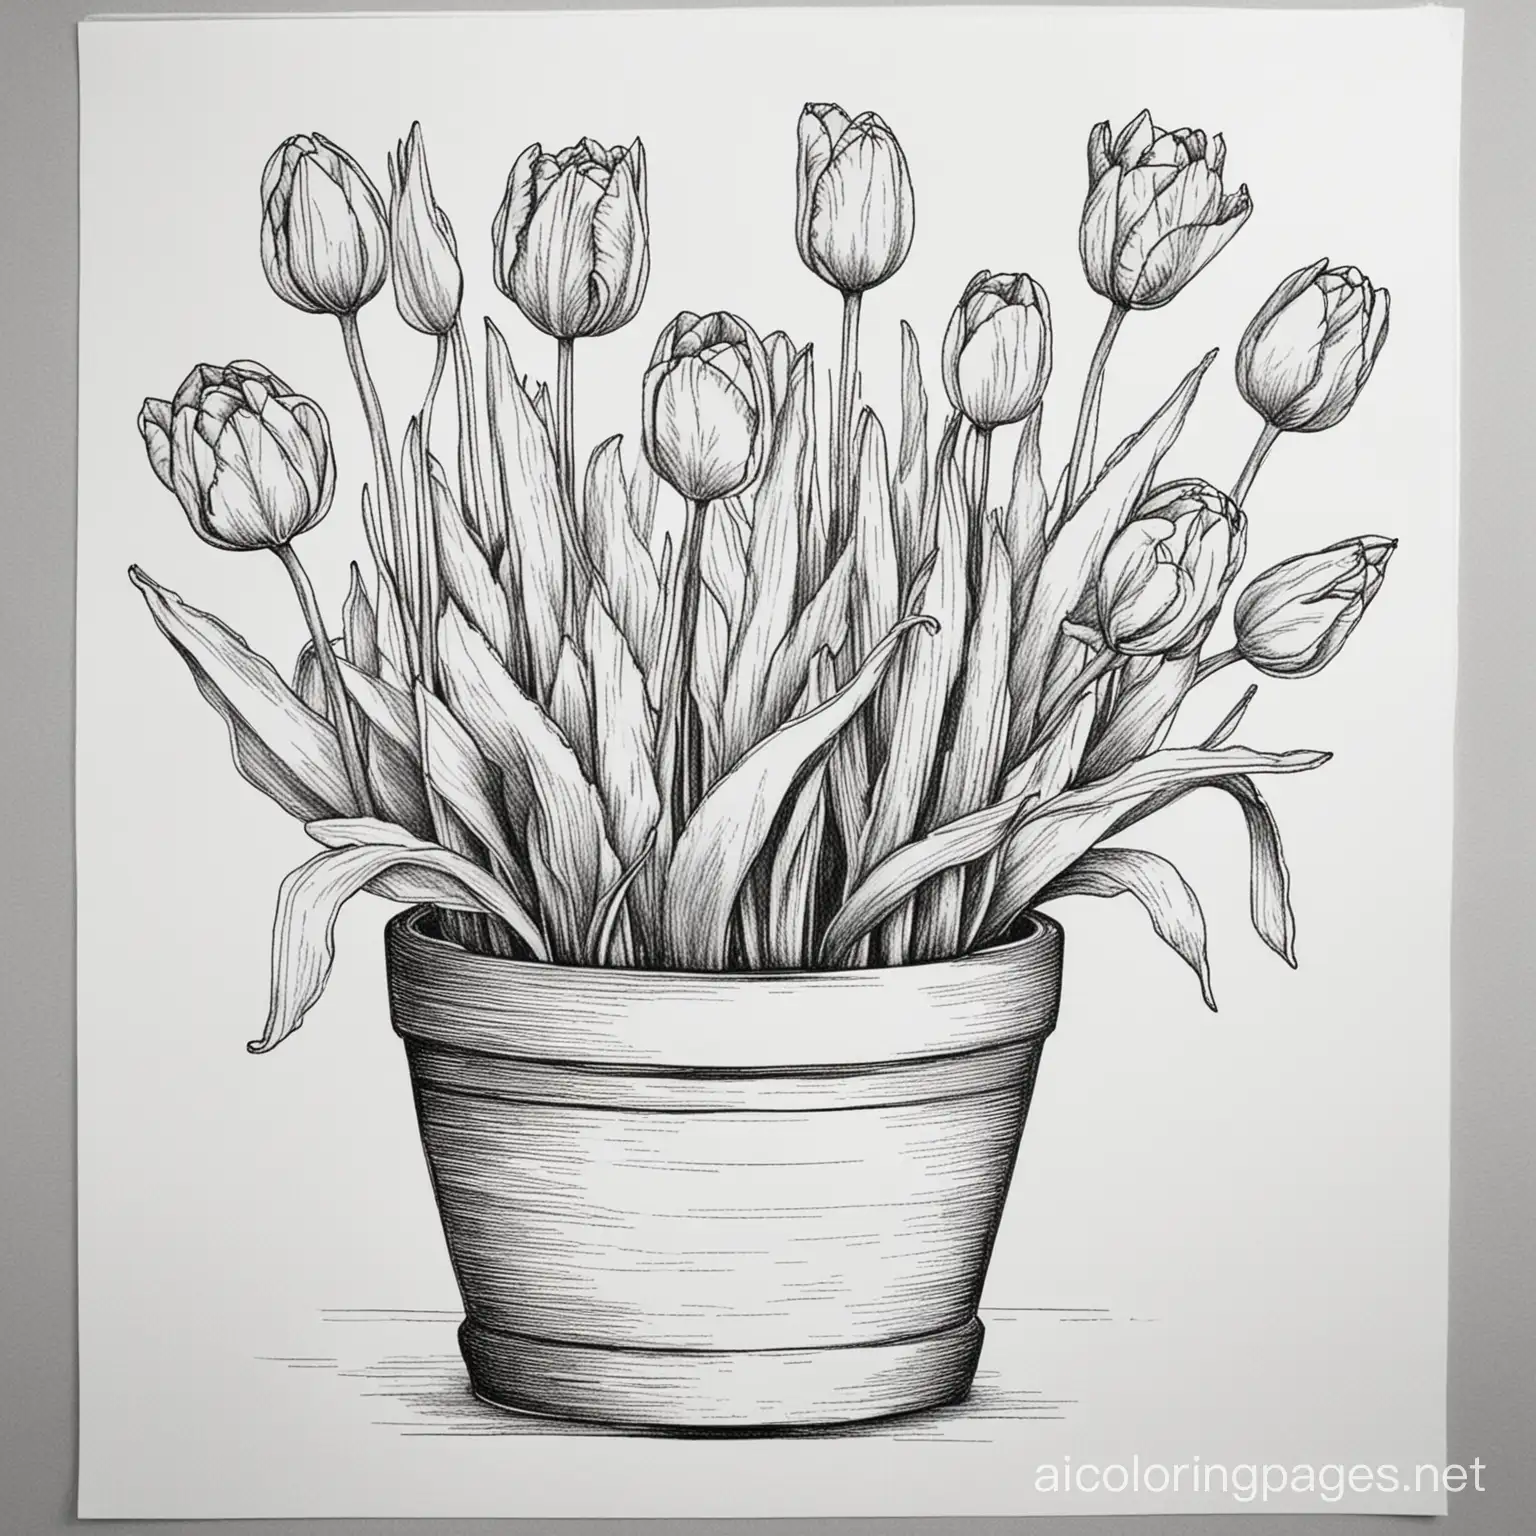 Create a picture for adult colouring in black and white only.  The theme of the picture: British garden. gardening. Style: sketching, ink, line drawings. the picture shows pots of flowers and tulips. The detail of the drawing is medium.  Ratio 3:4, Coloring Page, black and white, line art, white background, Simplicity, Ample White Space. The background of the coloring page is plain white to make it easy for young children to color within the lines. The outlines of all the subjects are easy to distinguish, making it simple for kids to color without too much difficulty